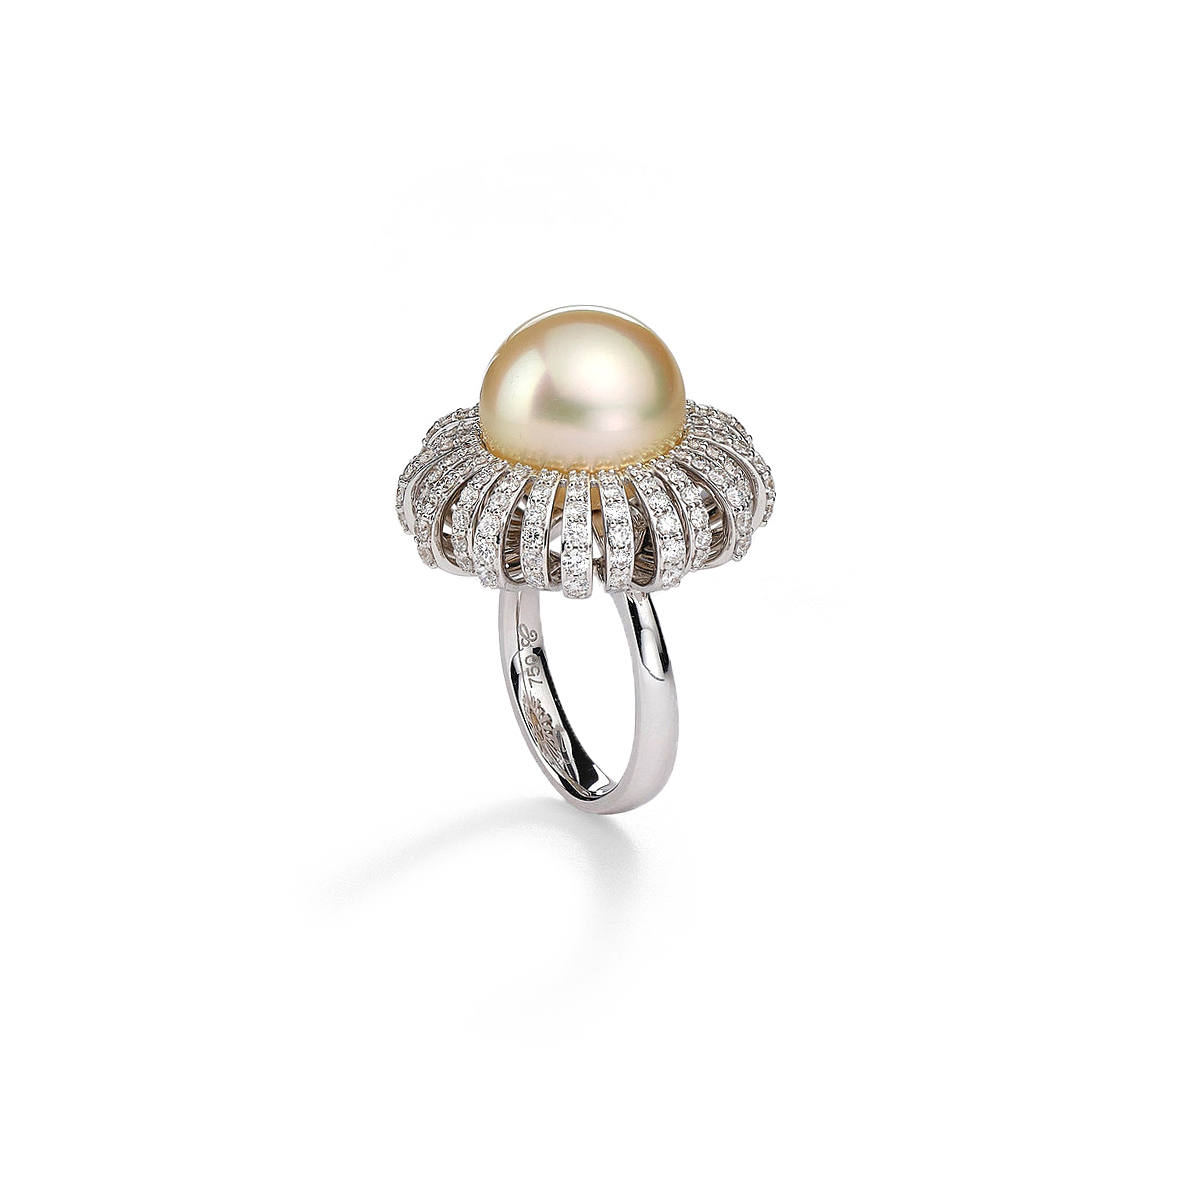 jewels-diamonds-yellow-overtonespink-green-pearl-18kt-white-gold-ring